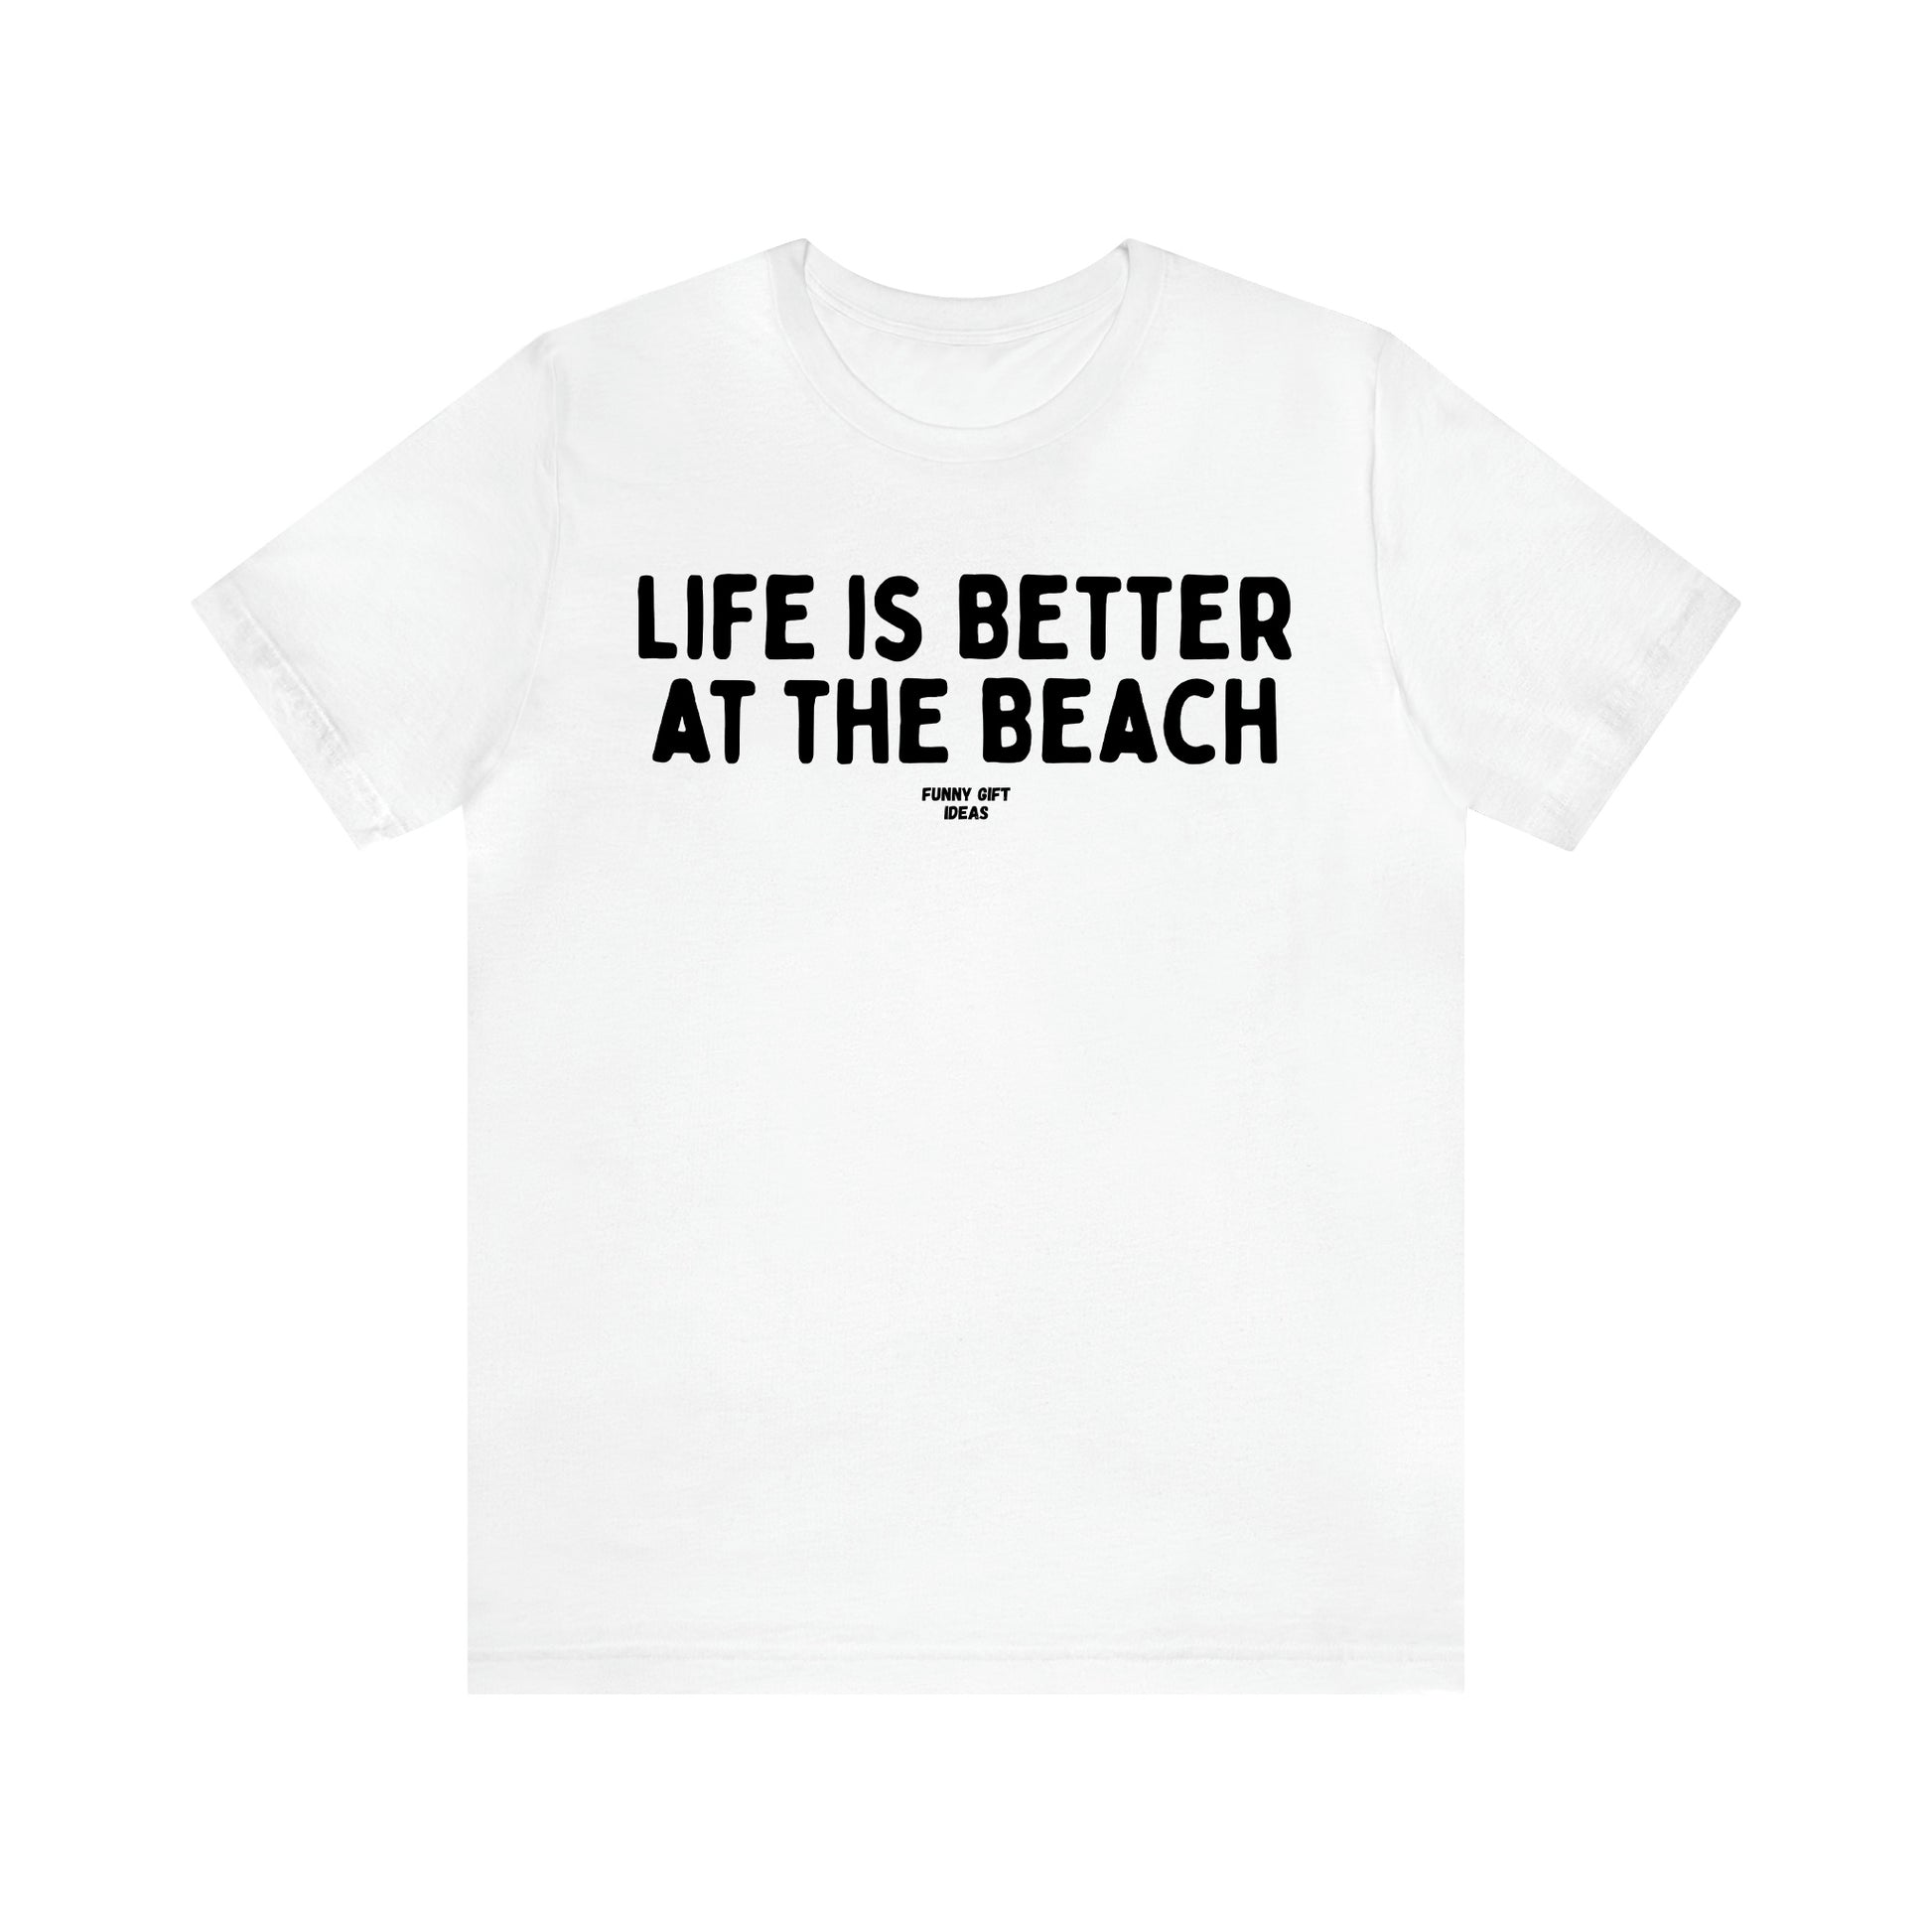 Women's T Shirts Life is Better at the Beach - Funny Gift Ideas